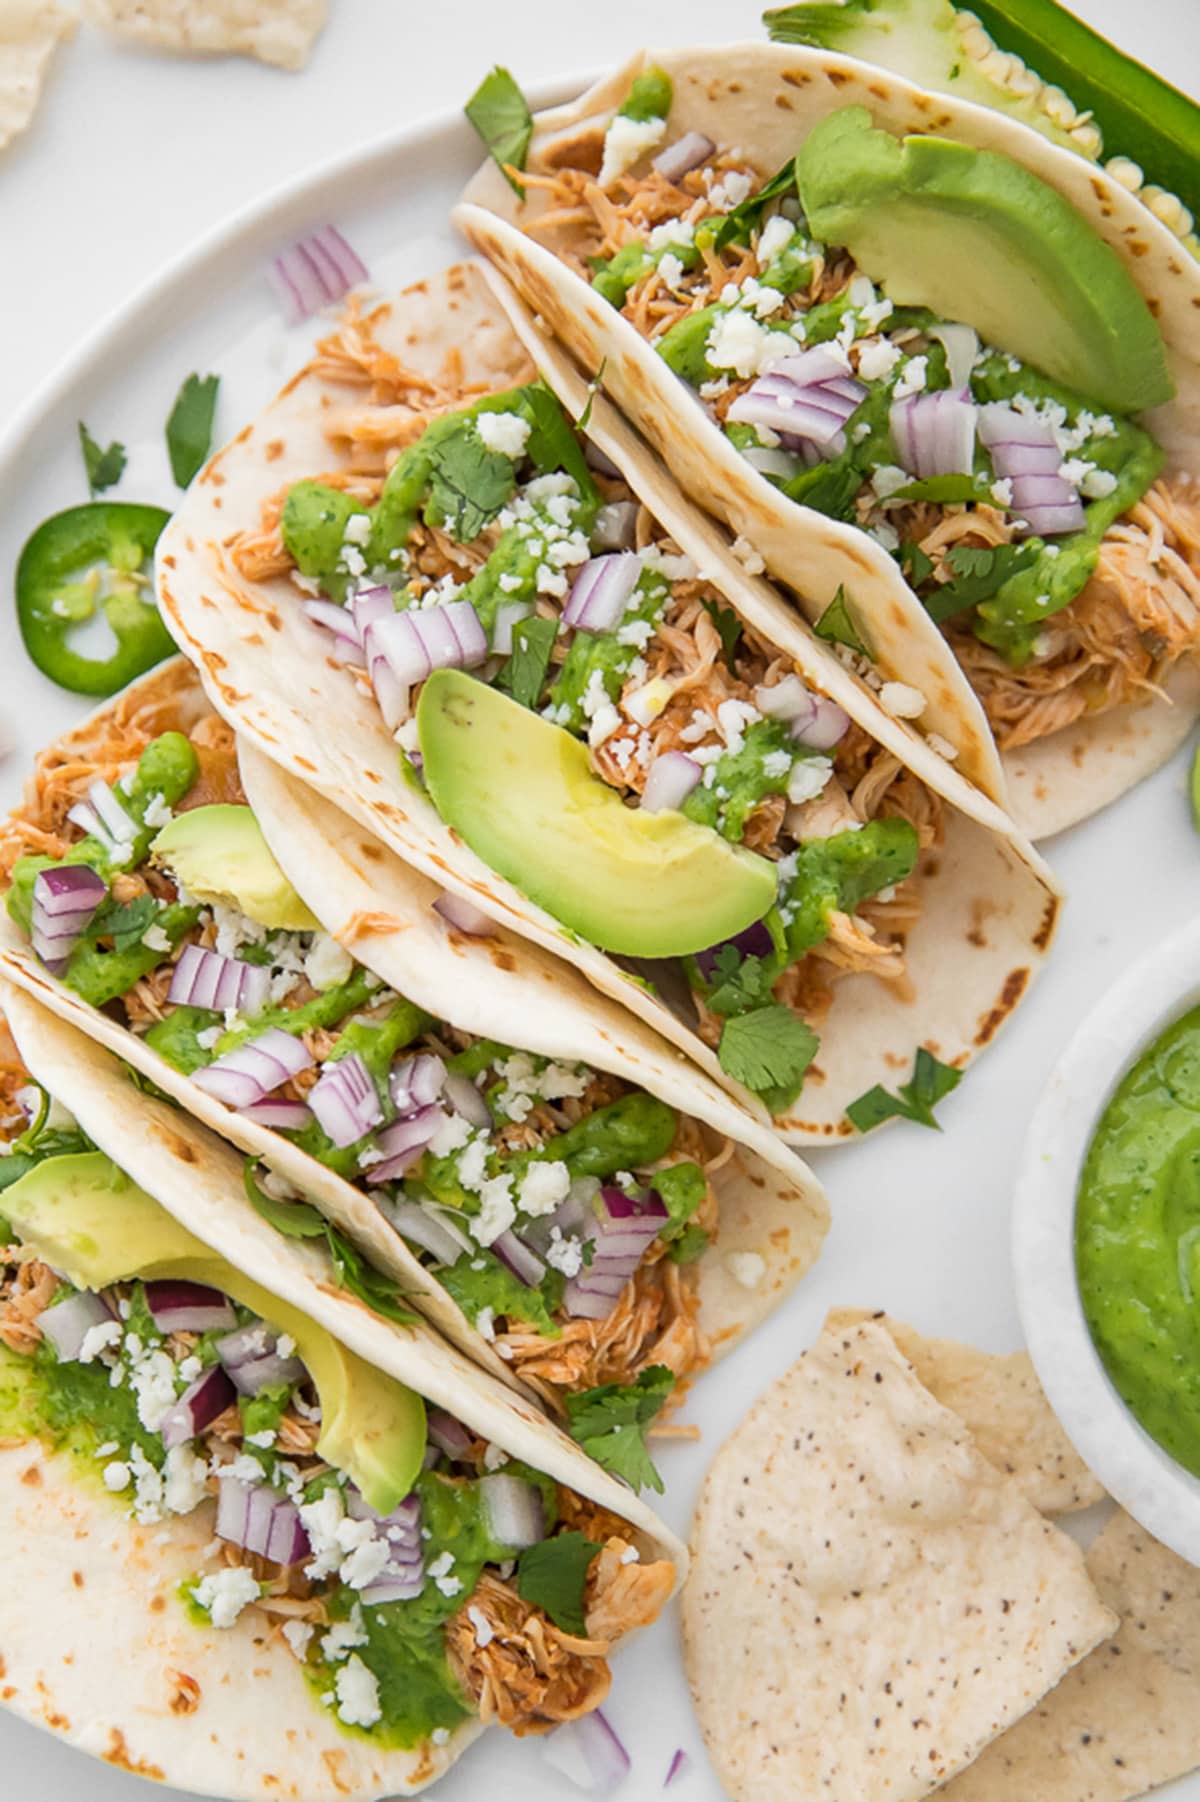 4 Crockpot chicken tacos topped with avocado, cilantro, queso fresco, and red onion lined up in a row on a platter.